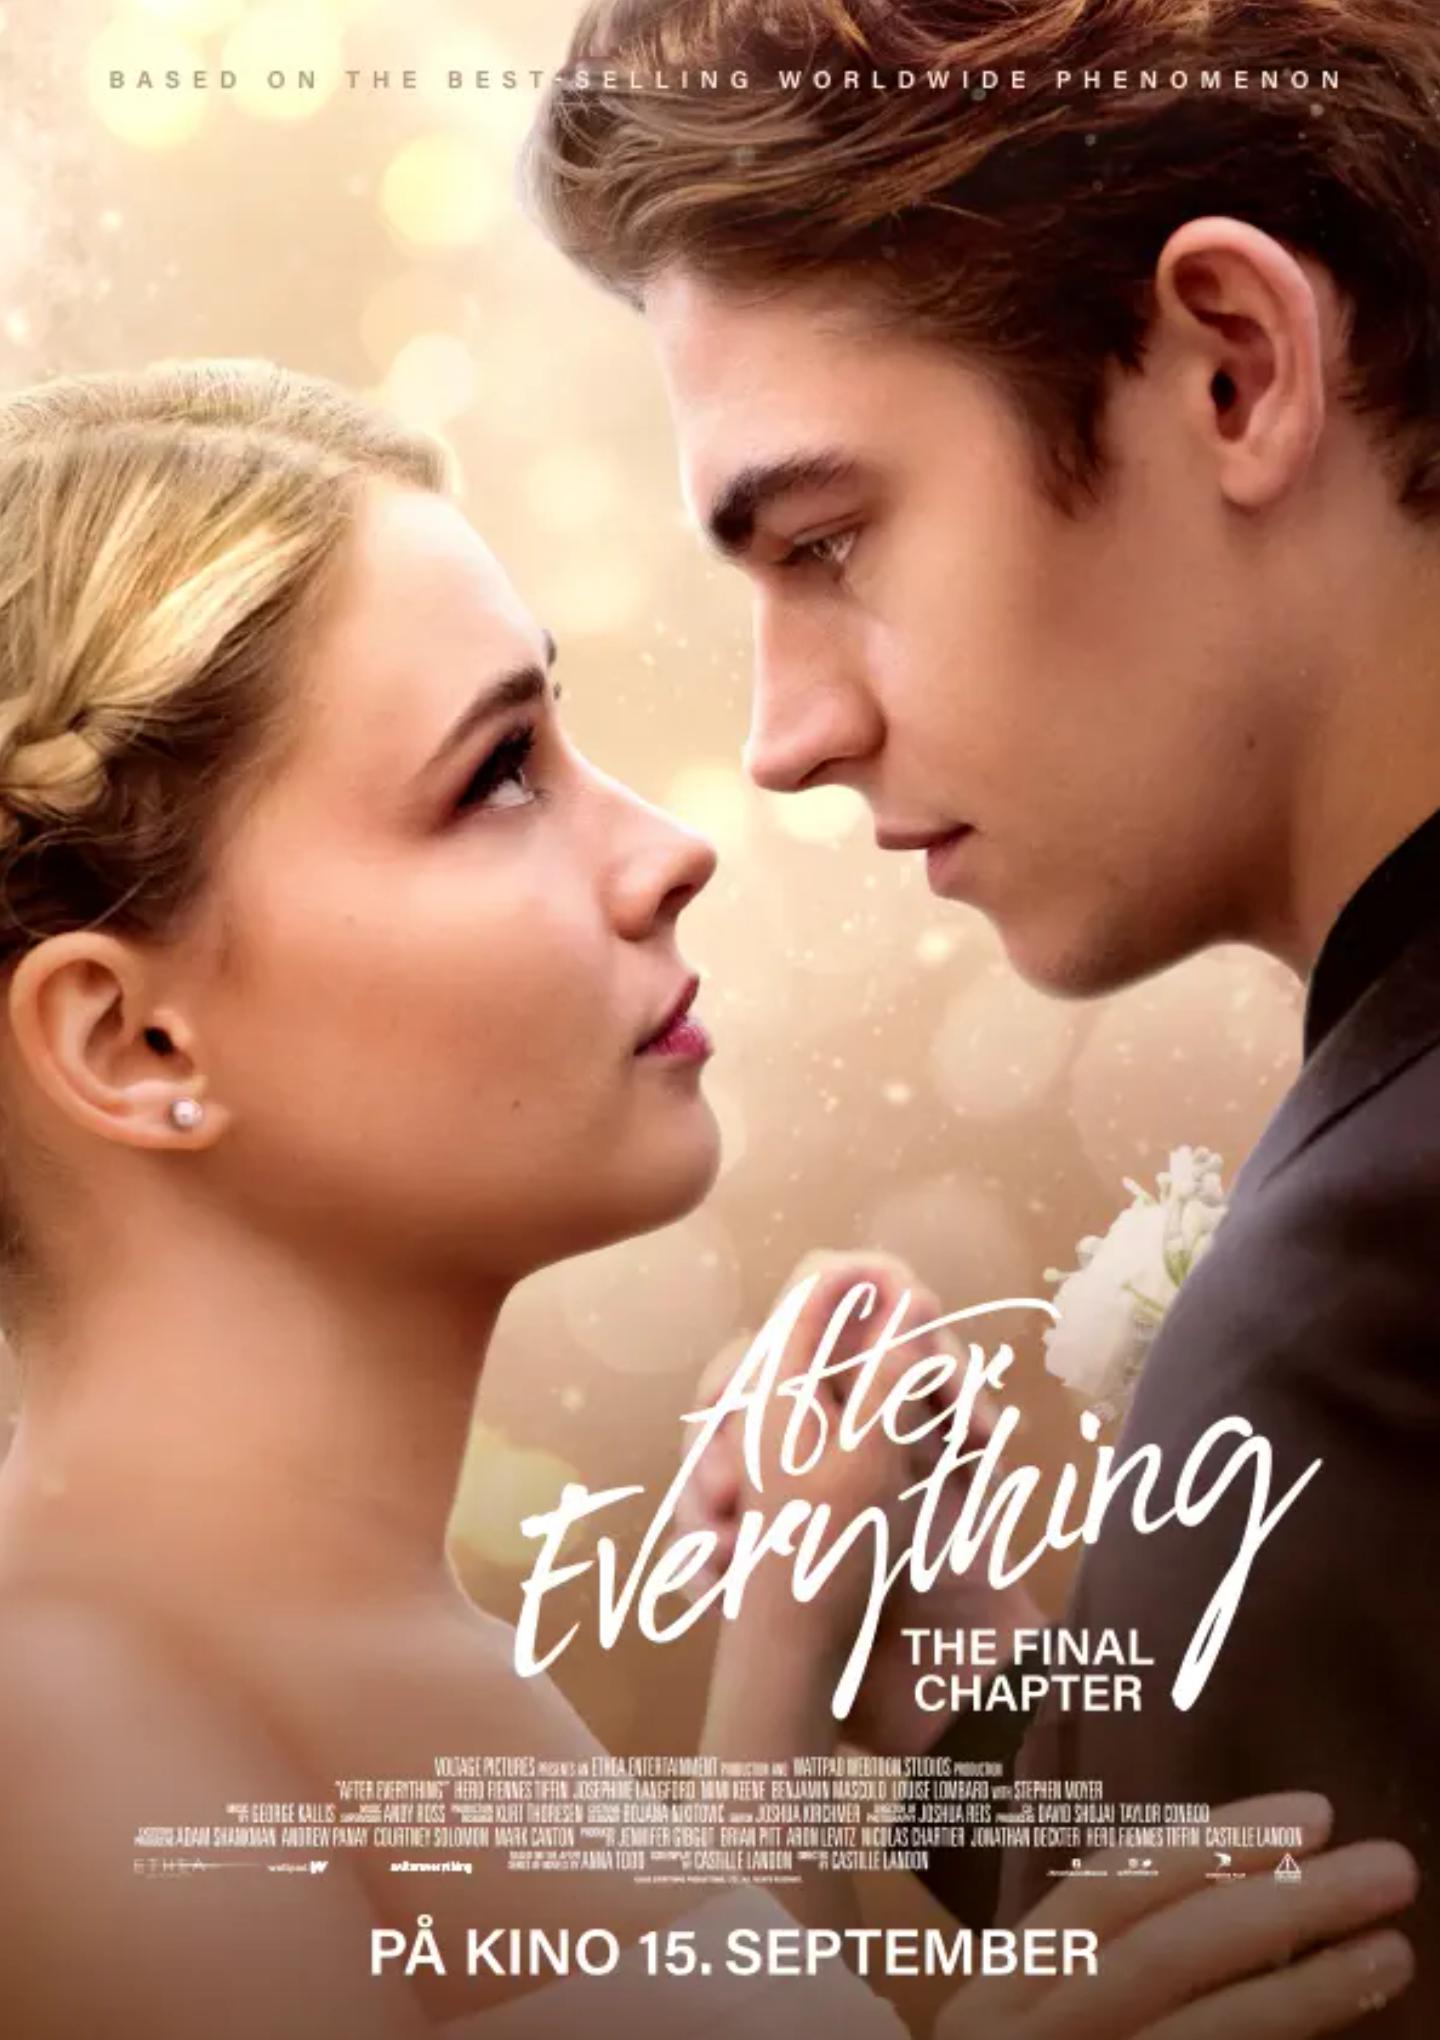 Plakat for 'After Everything'